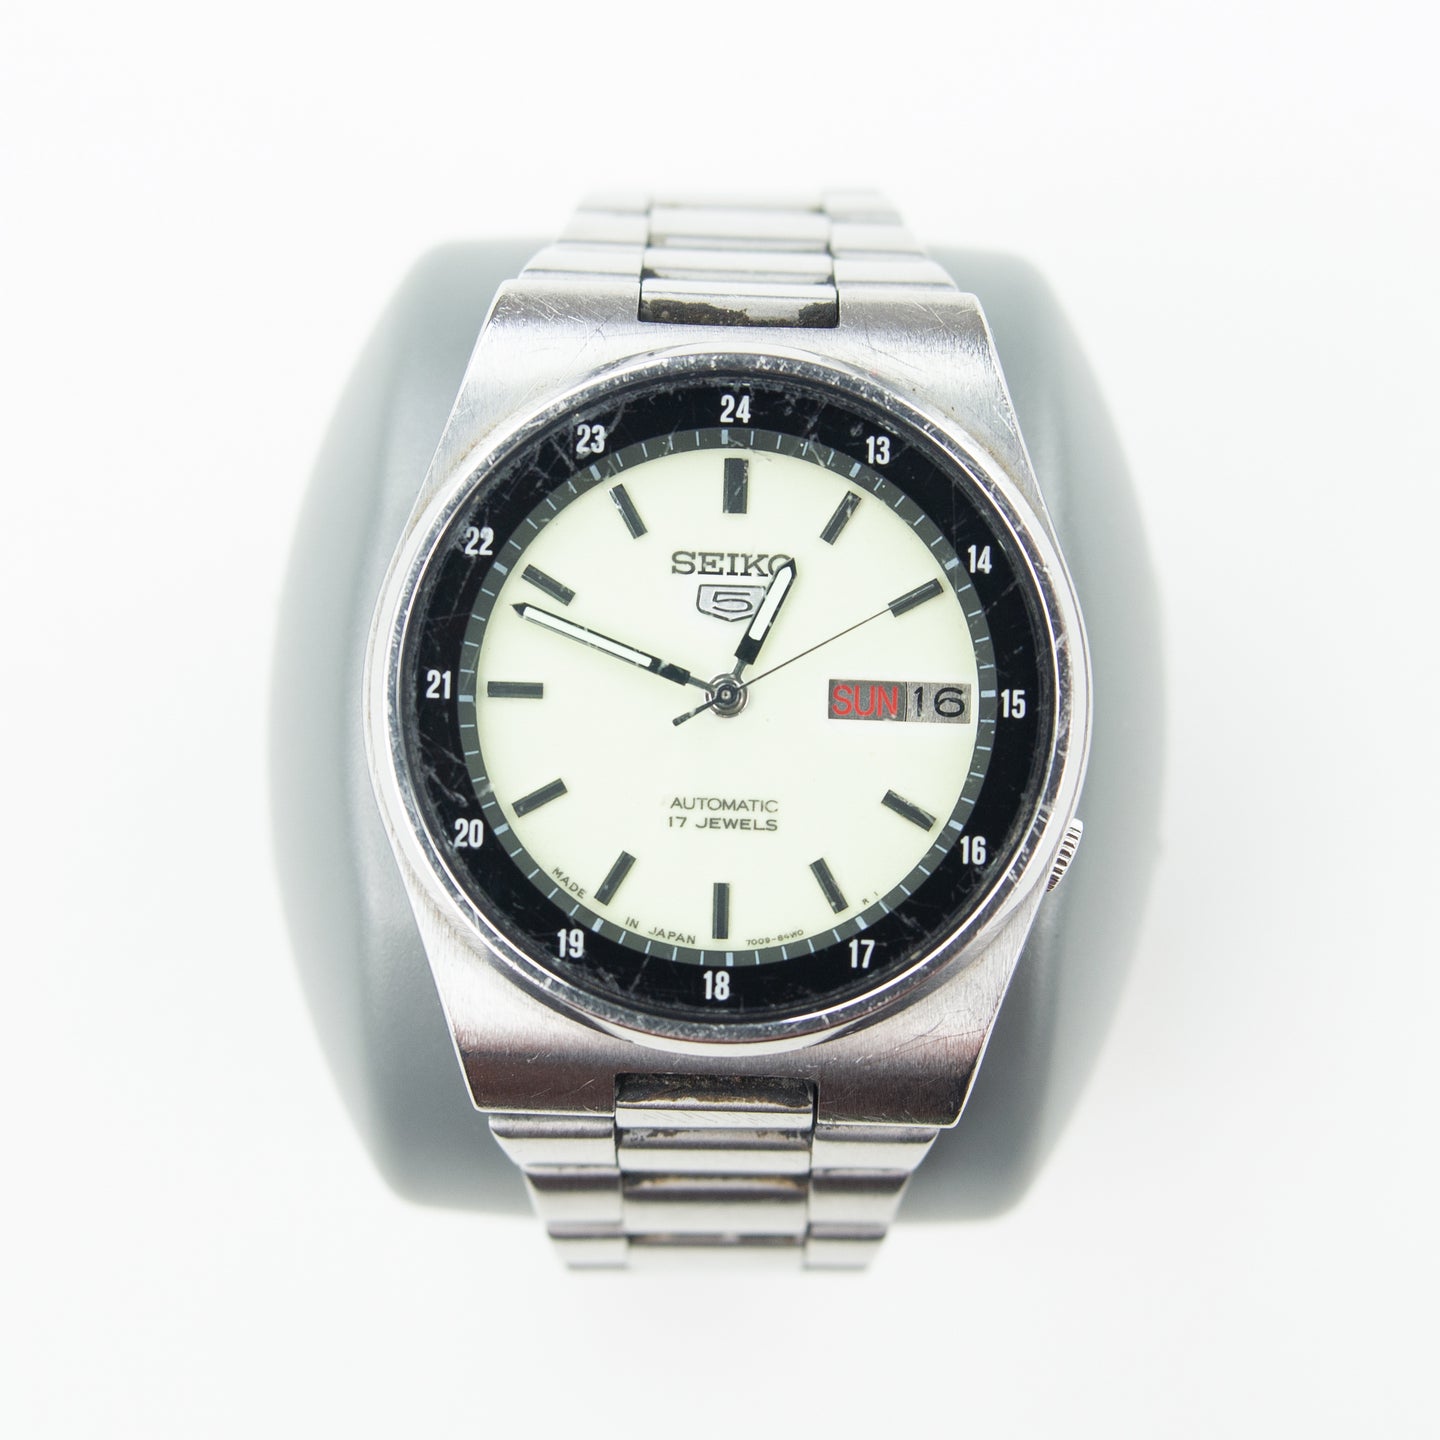 VINTAGE SEIKO AUTOMATIC WATCH FLUORESCENT FACE 7009 3161